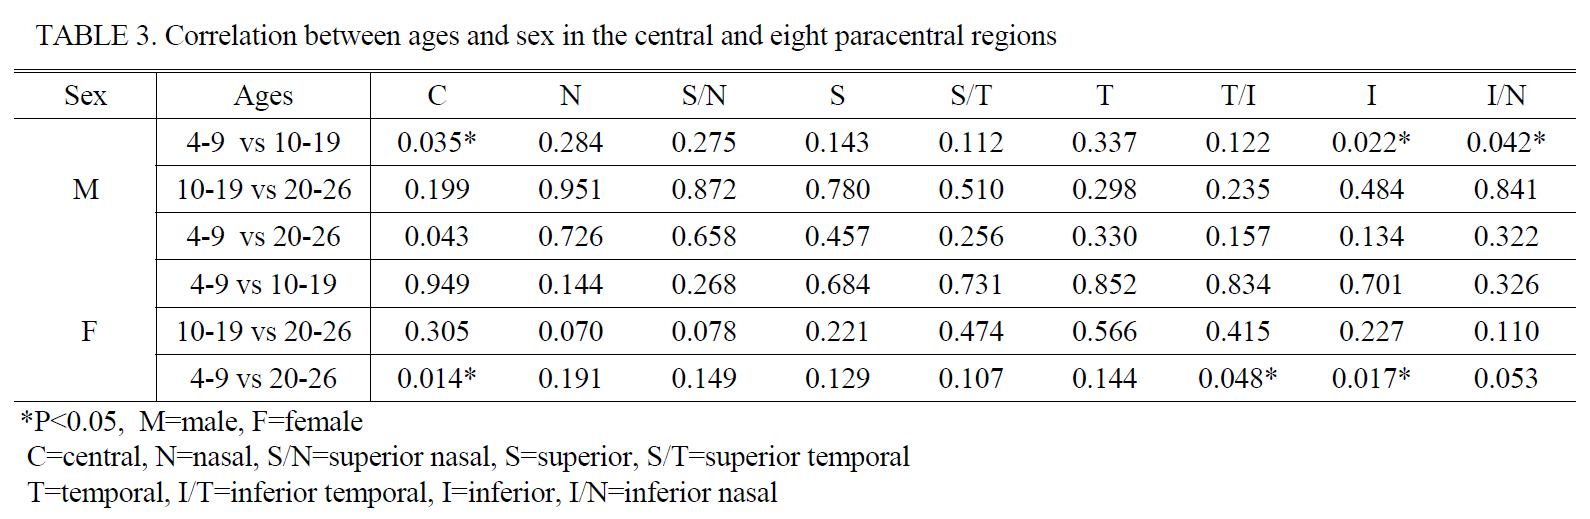 Correlation between ages and sex in the central and eight paracentral regions